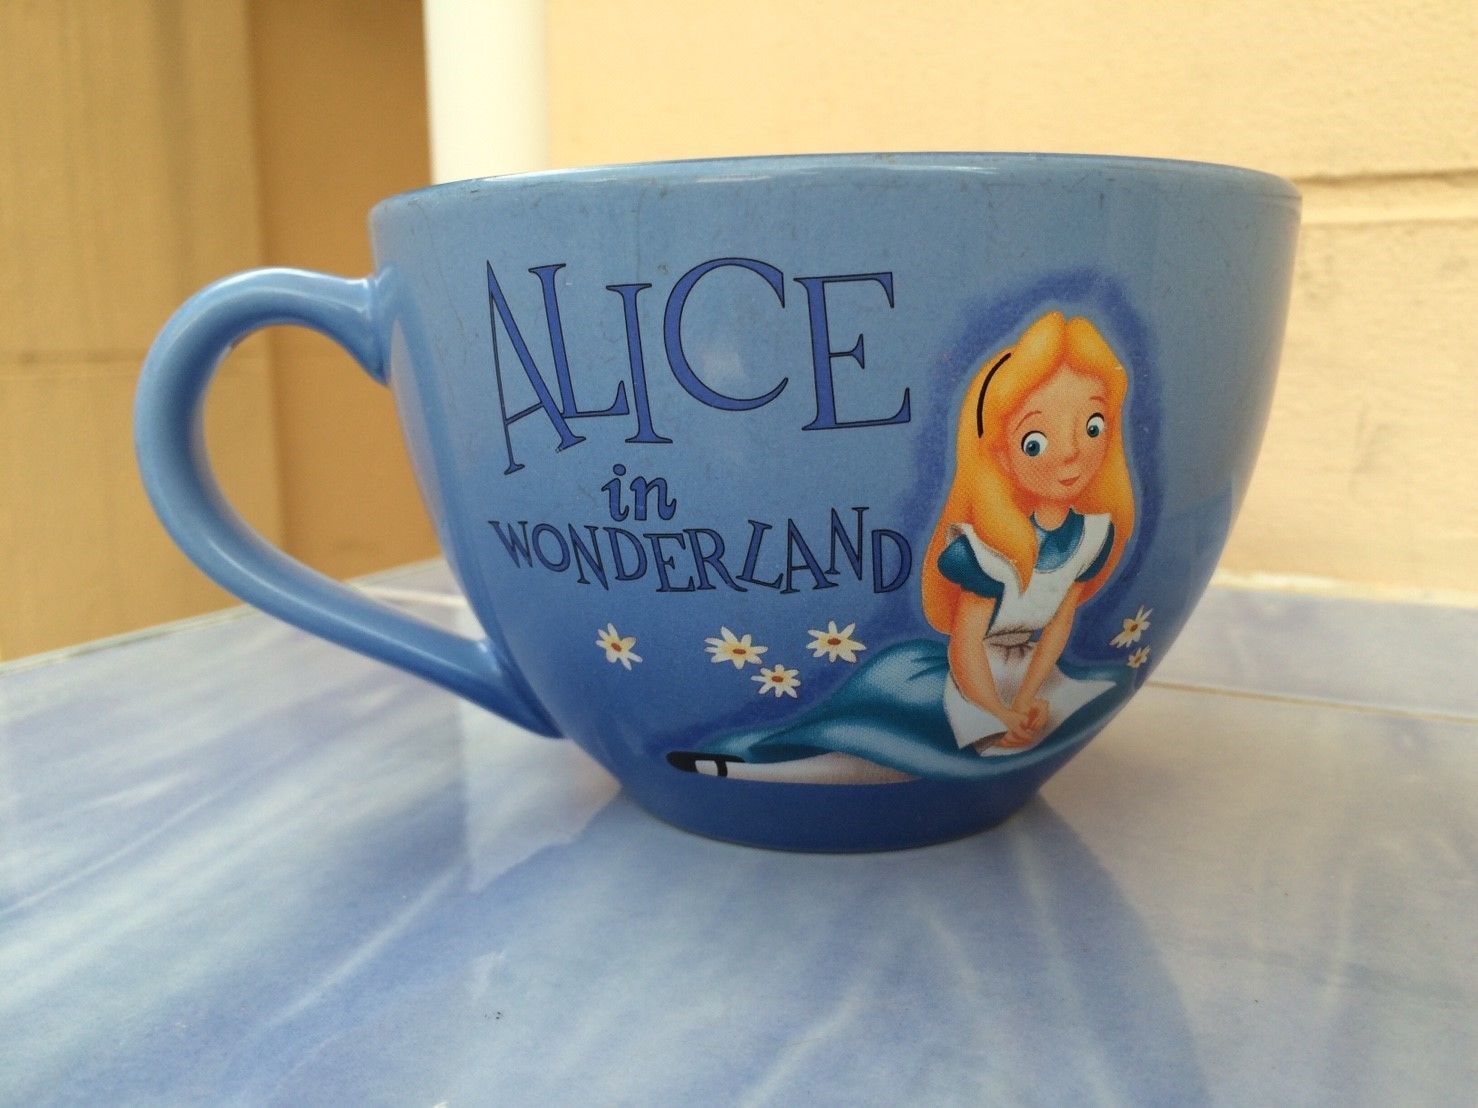 Disney Store Alice in Wonderland Ceramic Soup Cup.Very Beatiful, RARE collection - $35.00